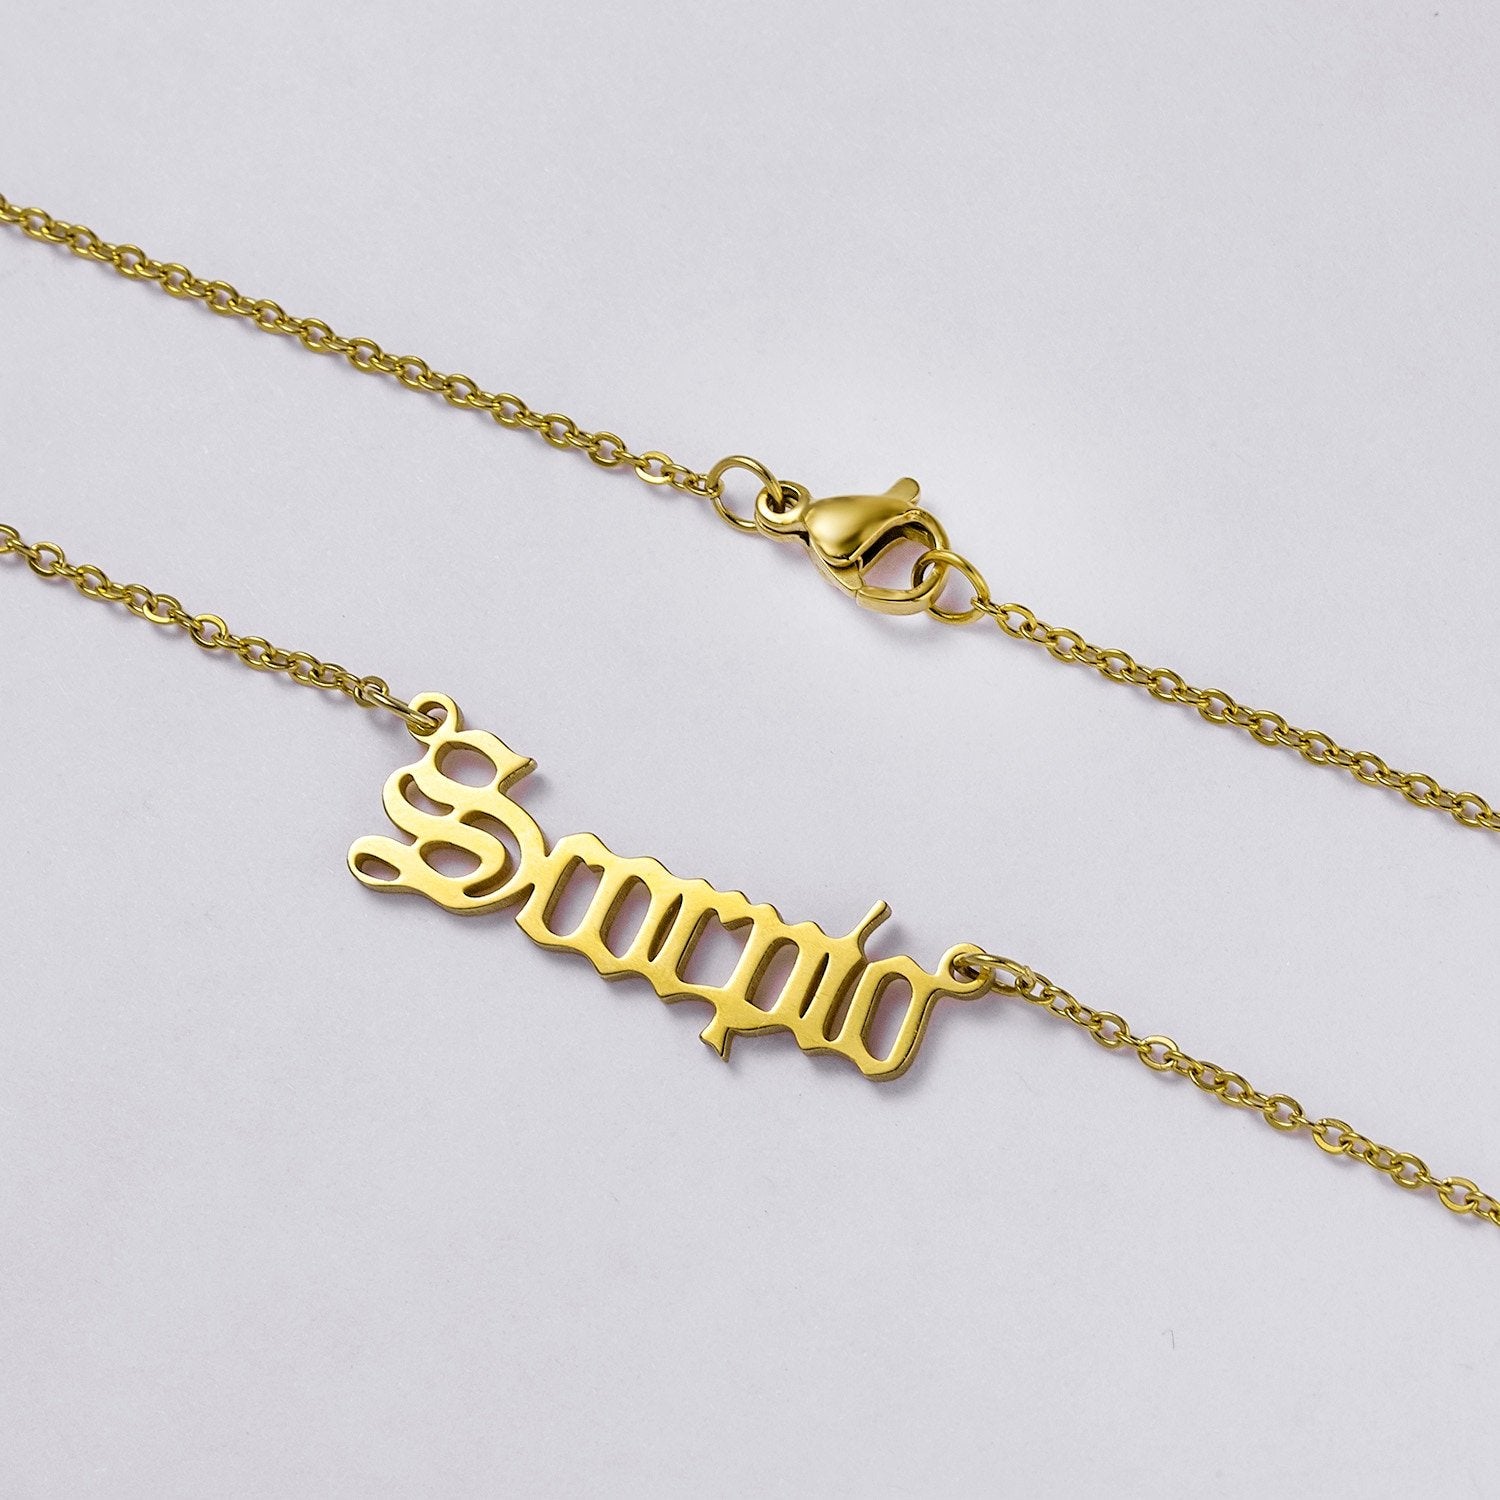 Closeup of the Scorpio Name Plate Necklace.